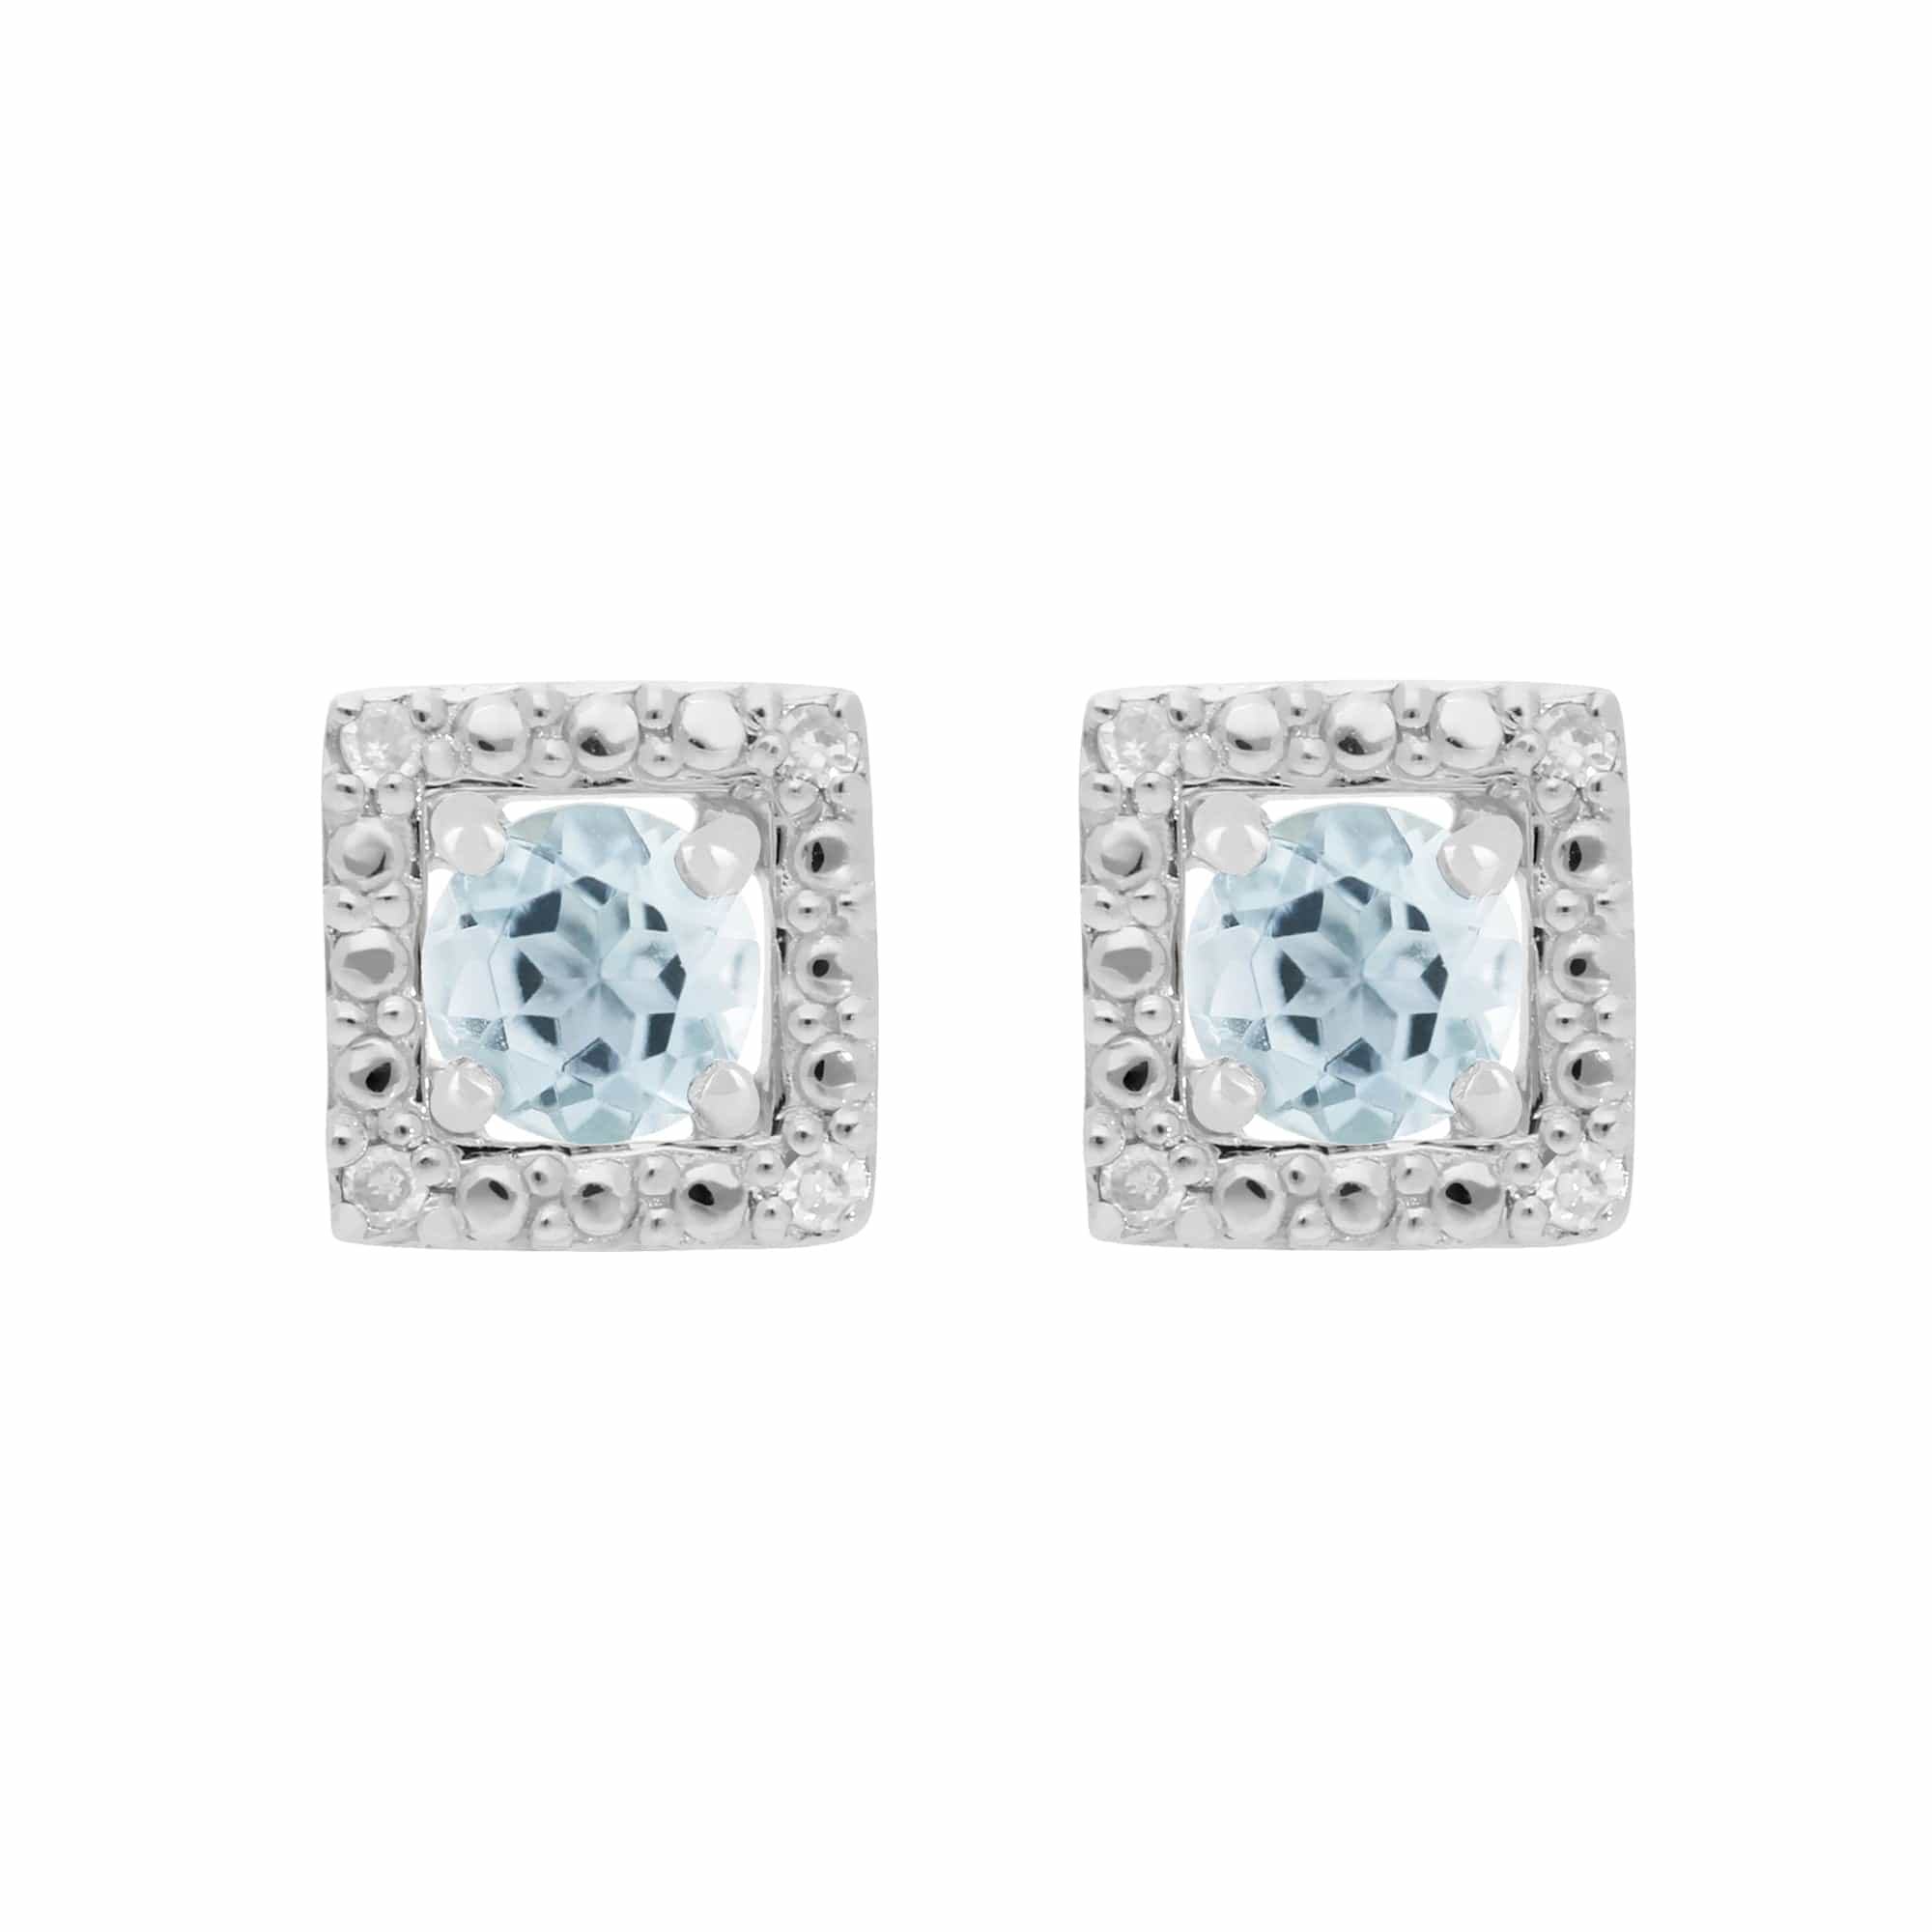 22526-162E0245019 Classic Round Aquamarine Stud Earrings with Detachable Diamond Square Ear Jacket in 9ct White Gold 1